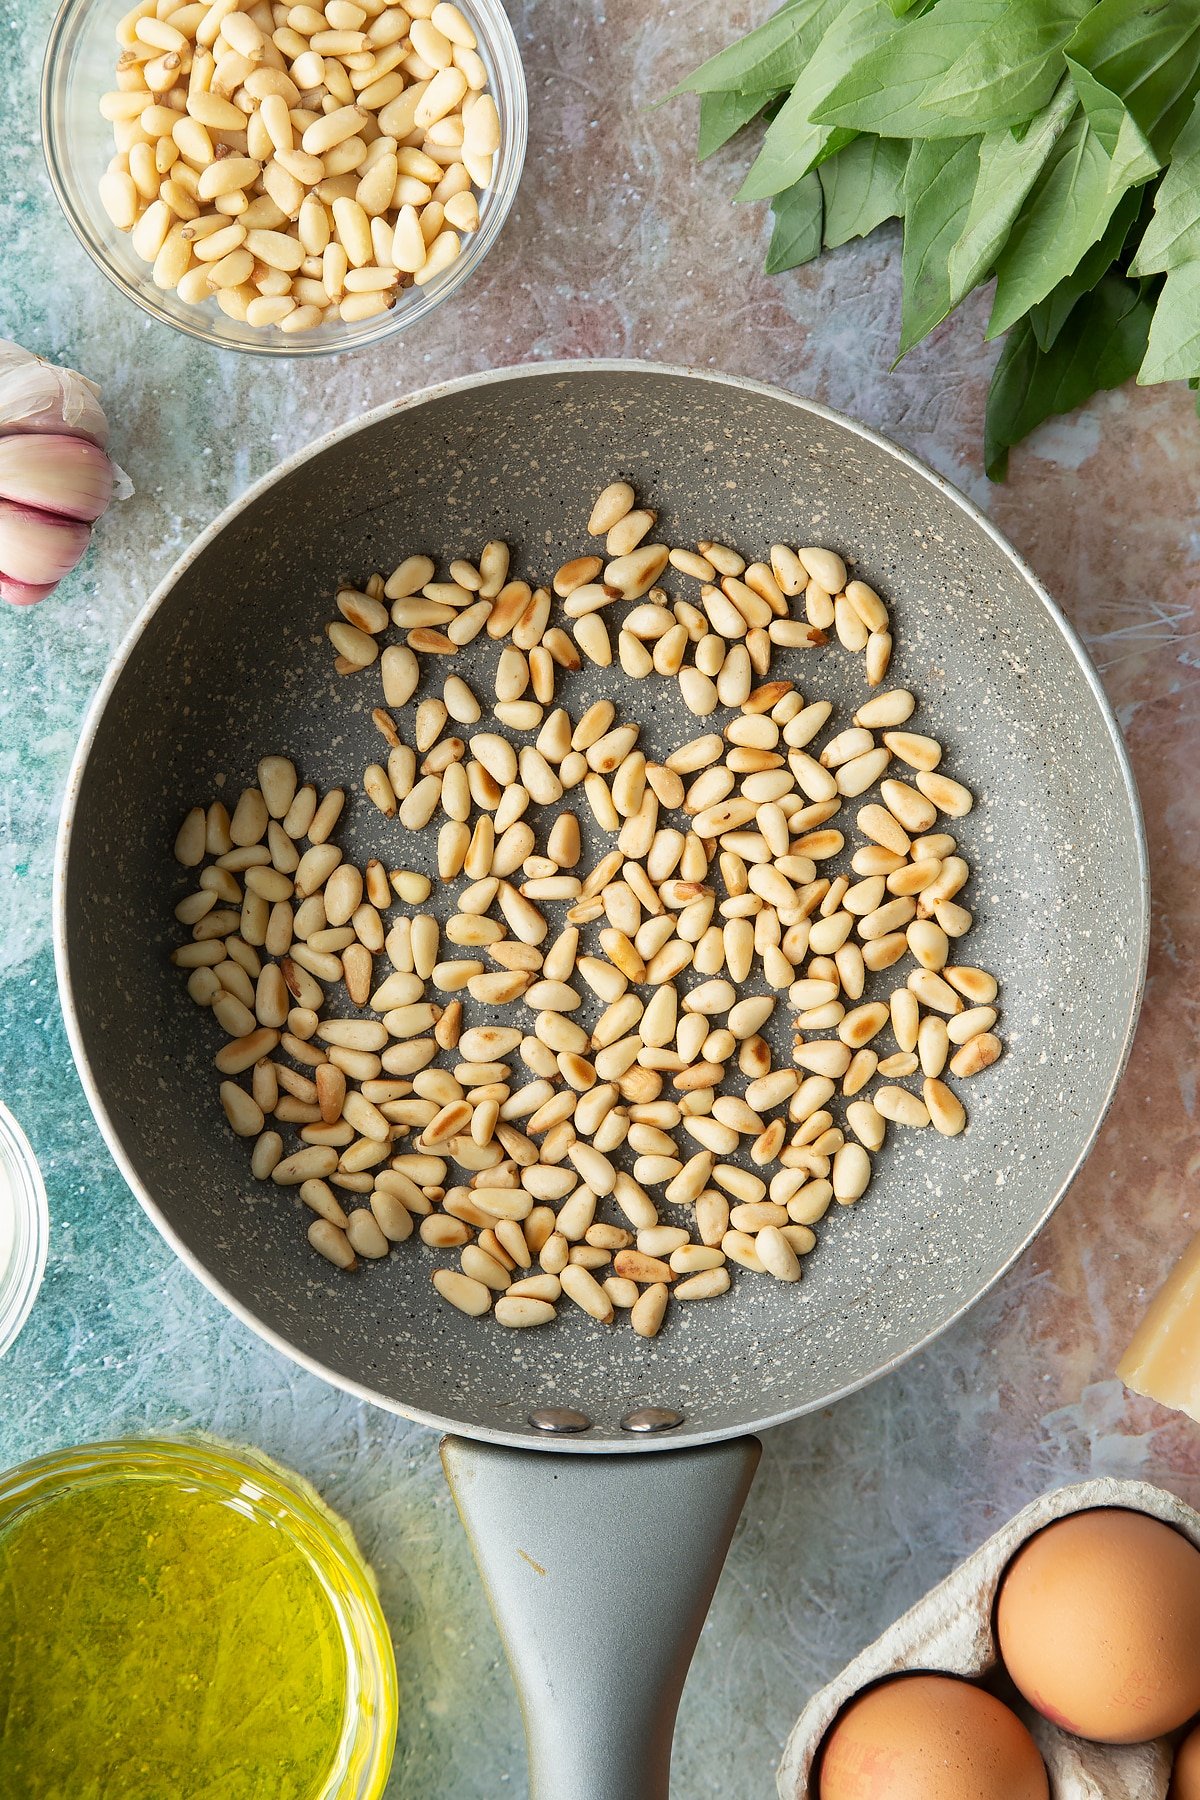 Toasted pine nuts in a small frying pan. Ingredients to make pesto mayo surround the pan.